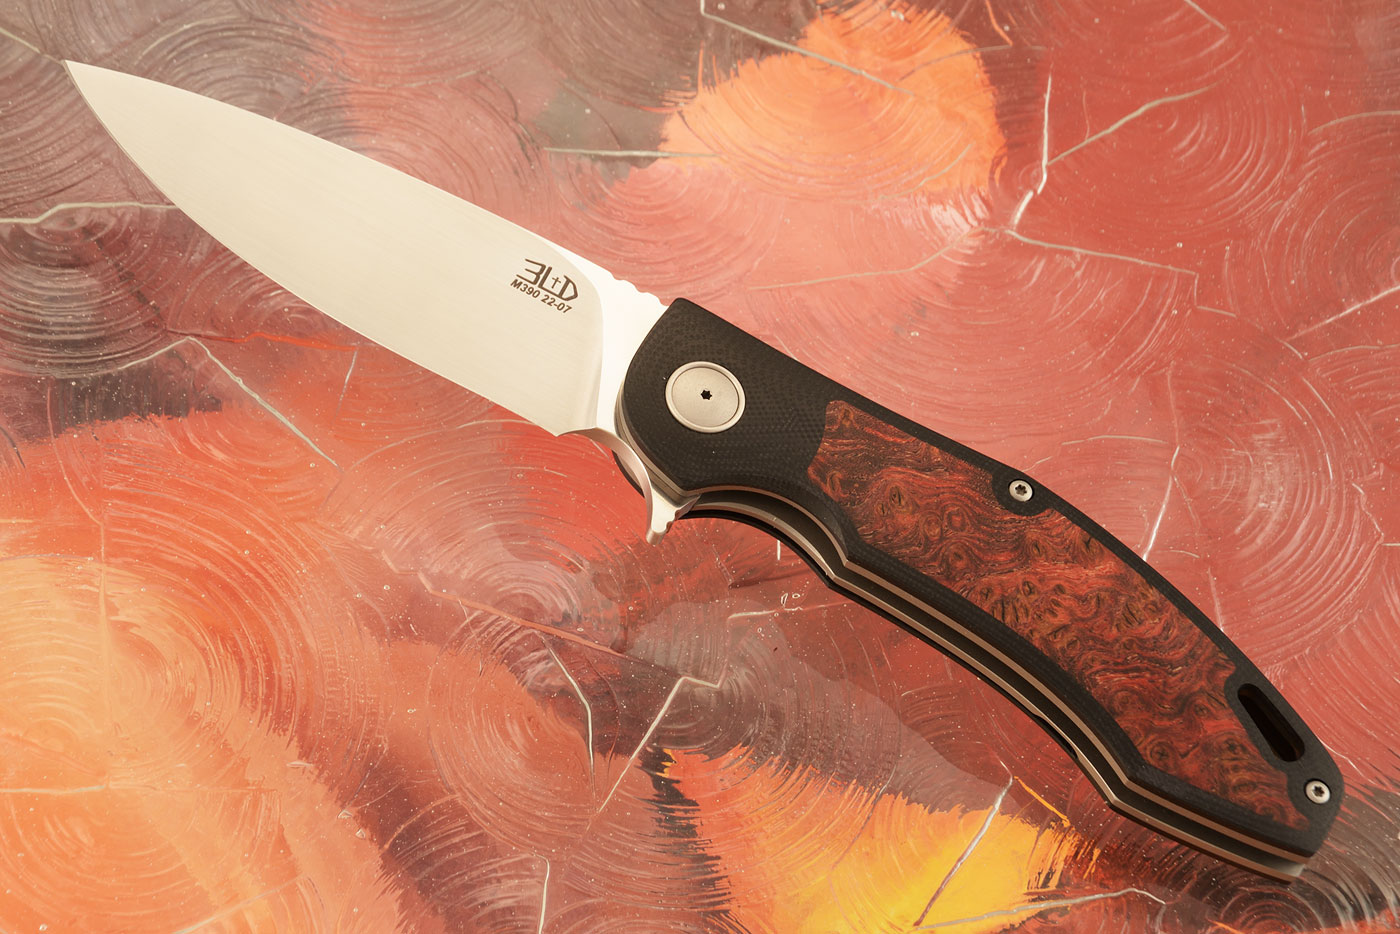 H4 Flipper with Black G10 and Maple Burl - M390